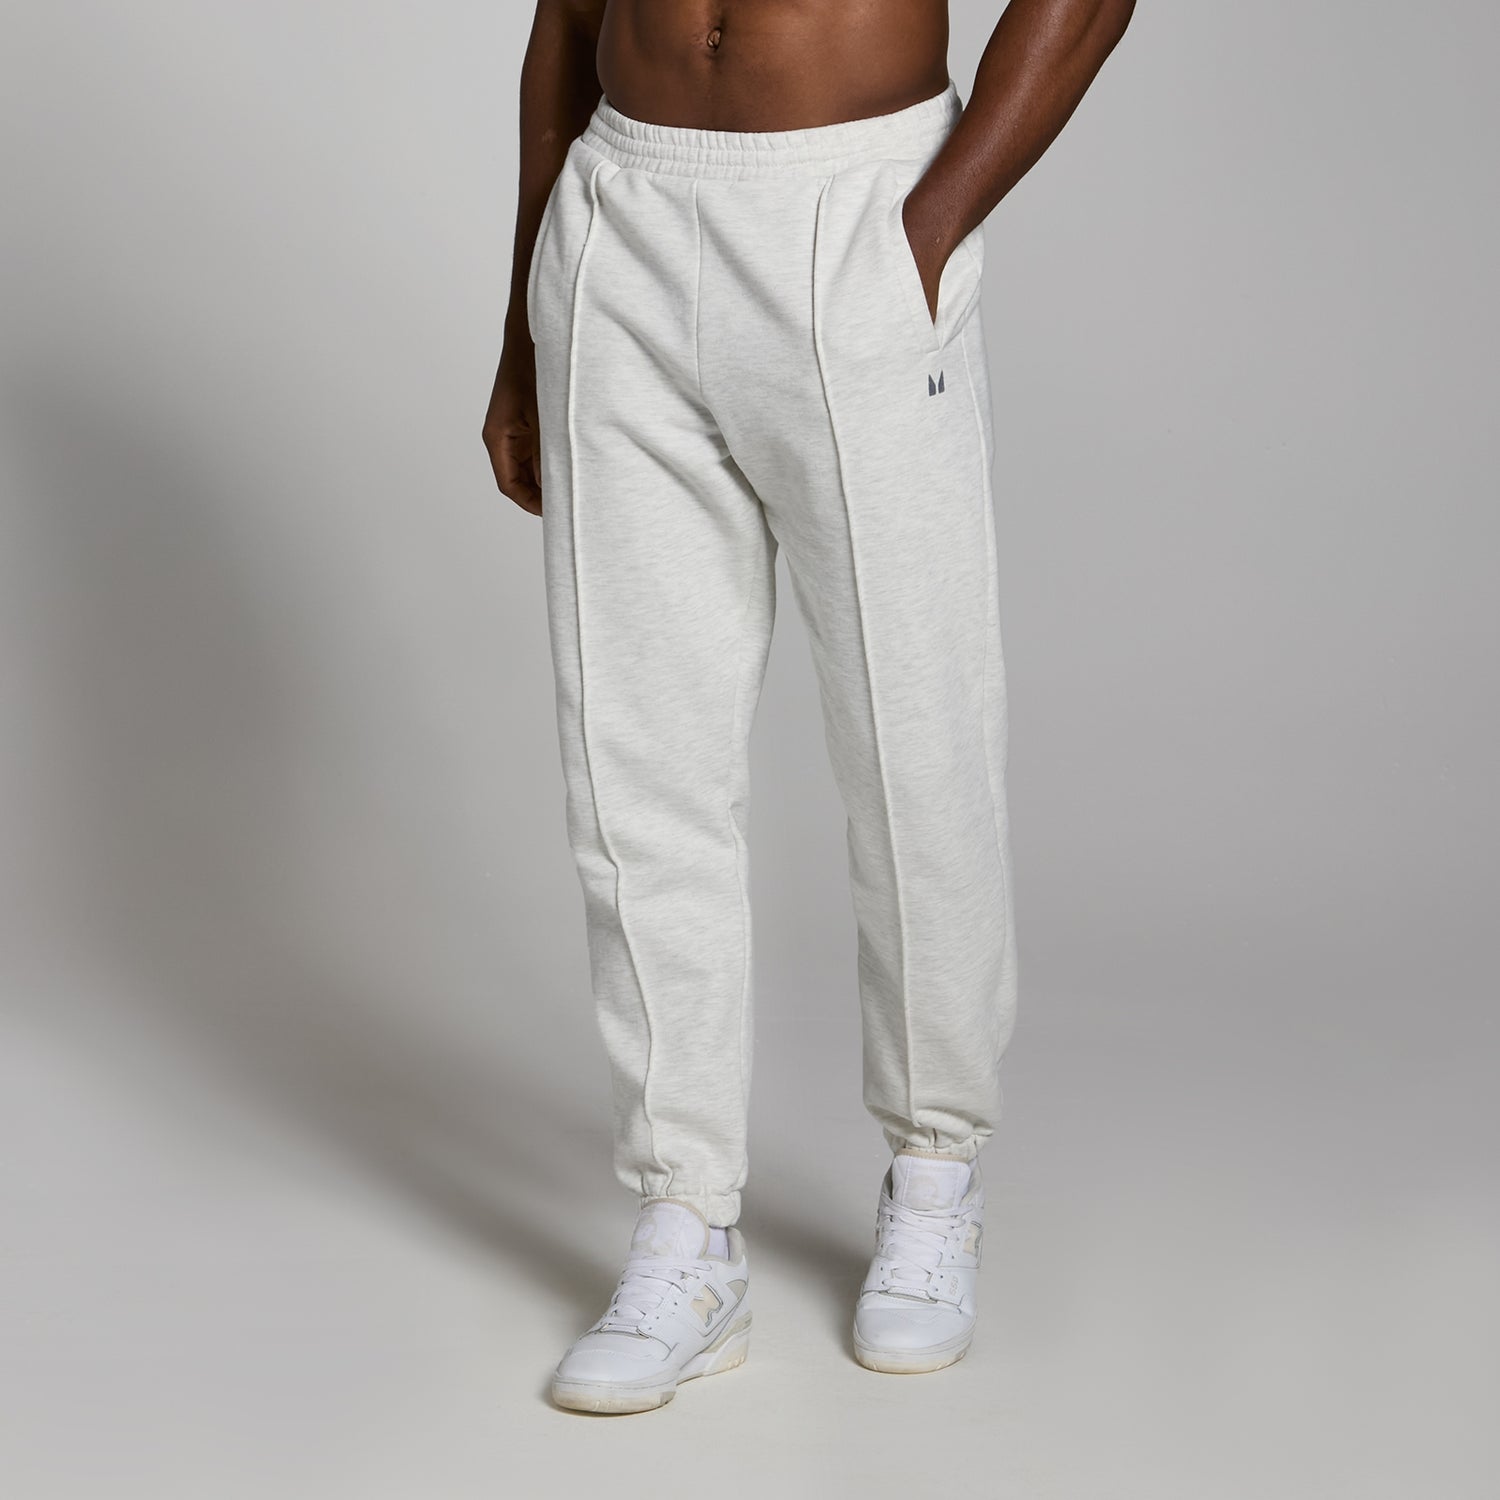 MP Lifestyle Heavyweight Oversized Joggers til mænd – Marl-lysegrå - XS